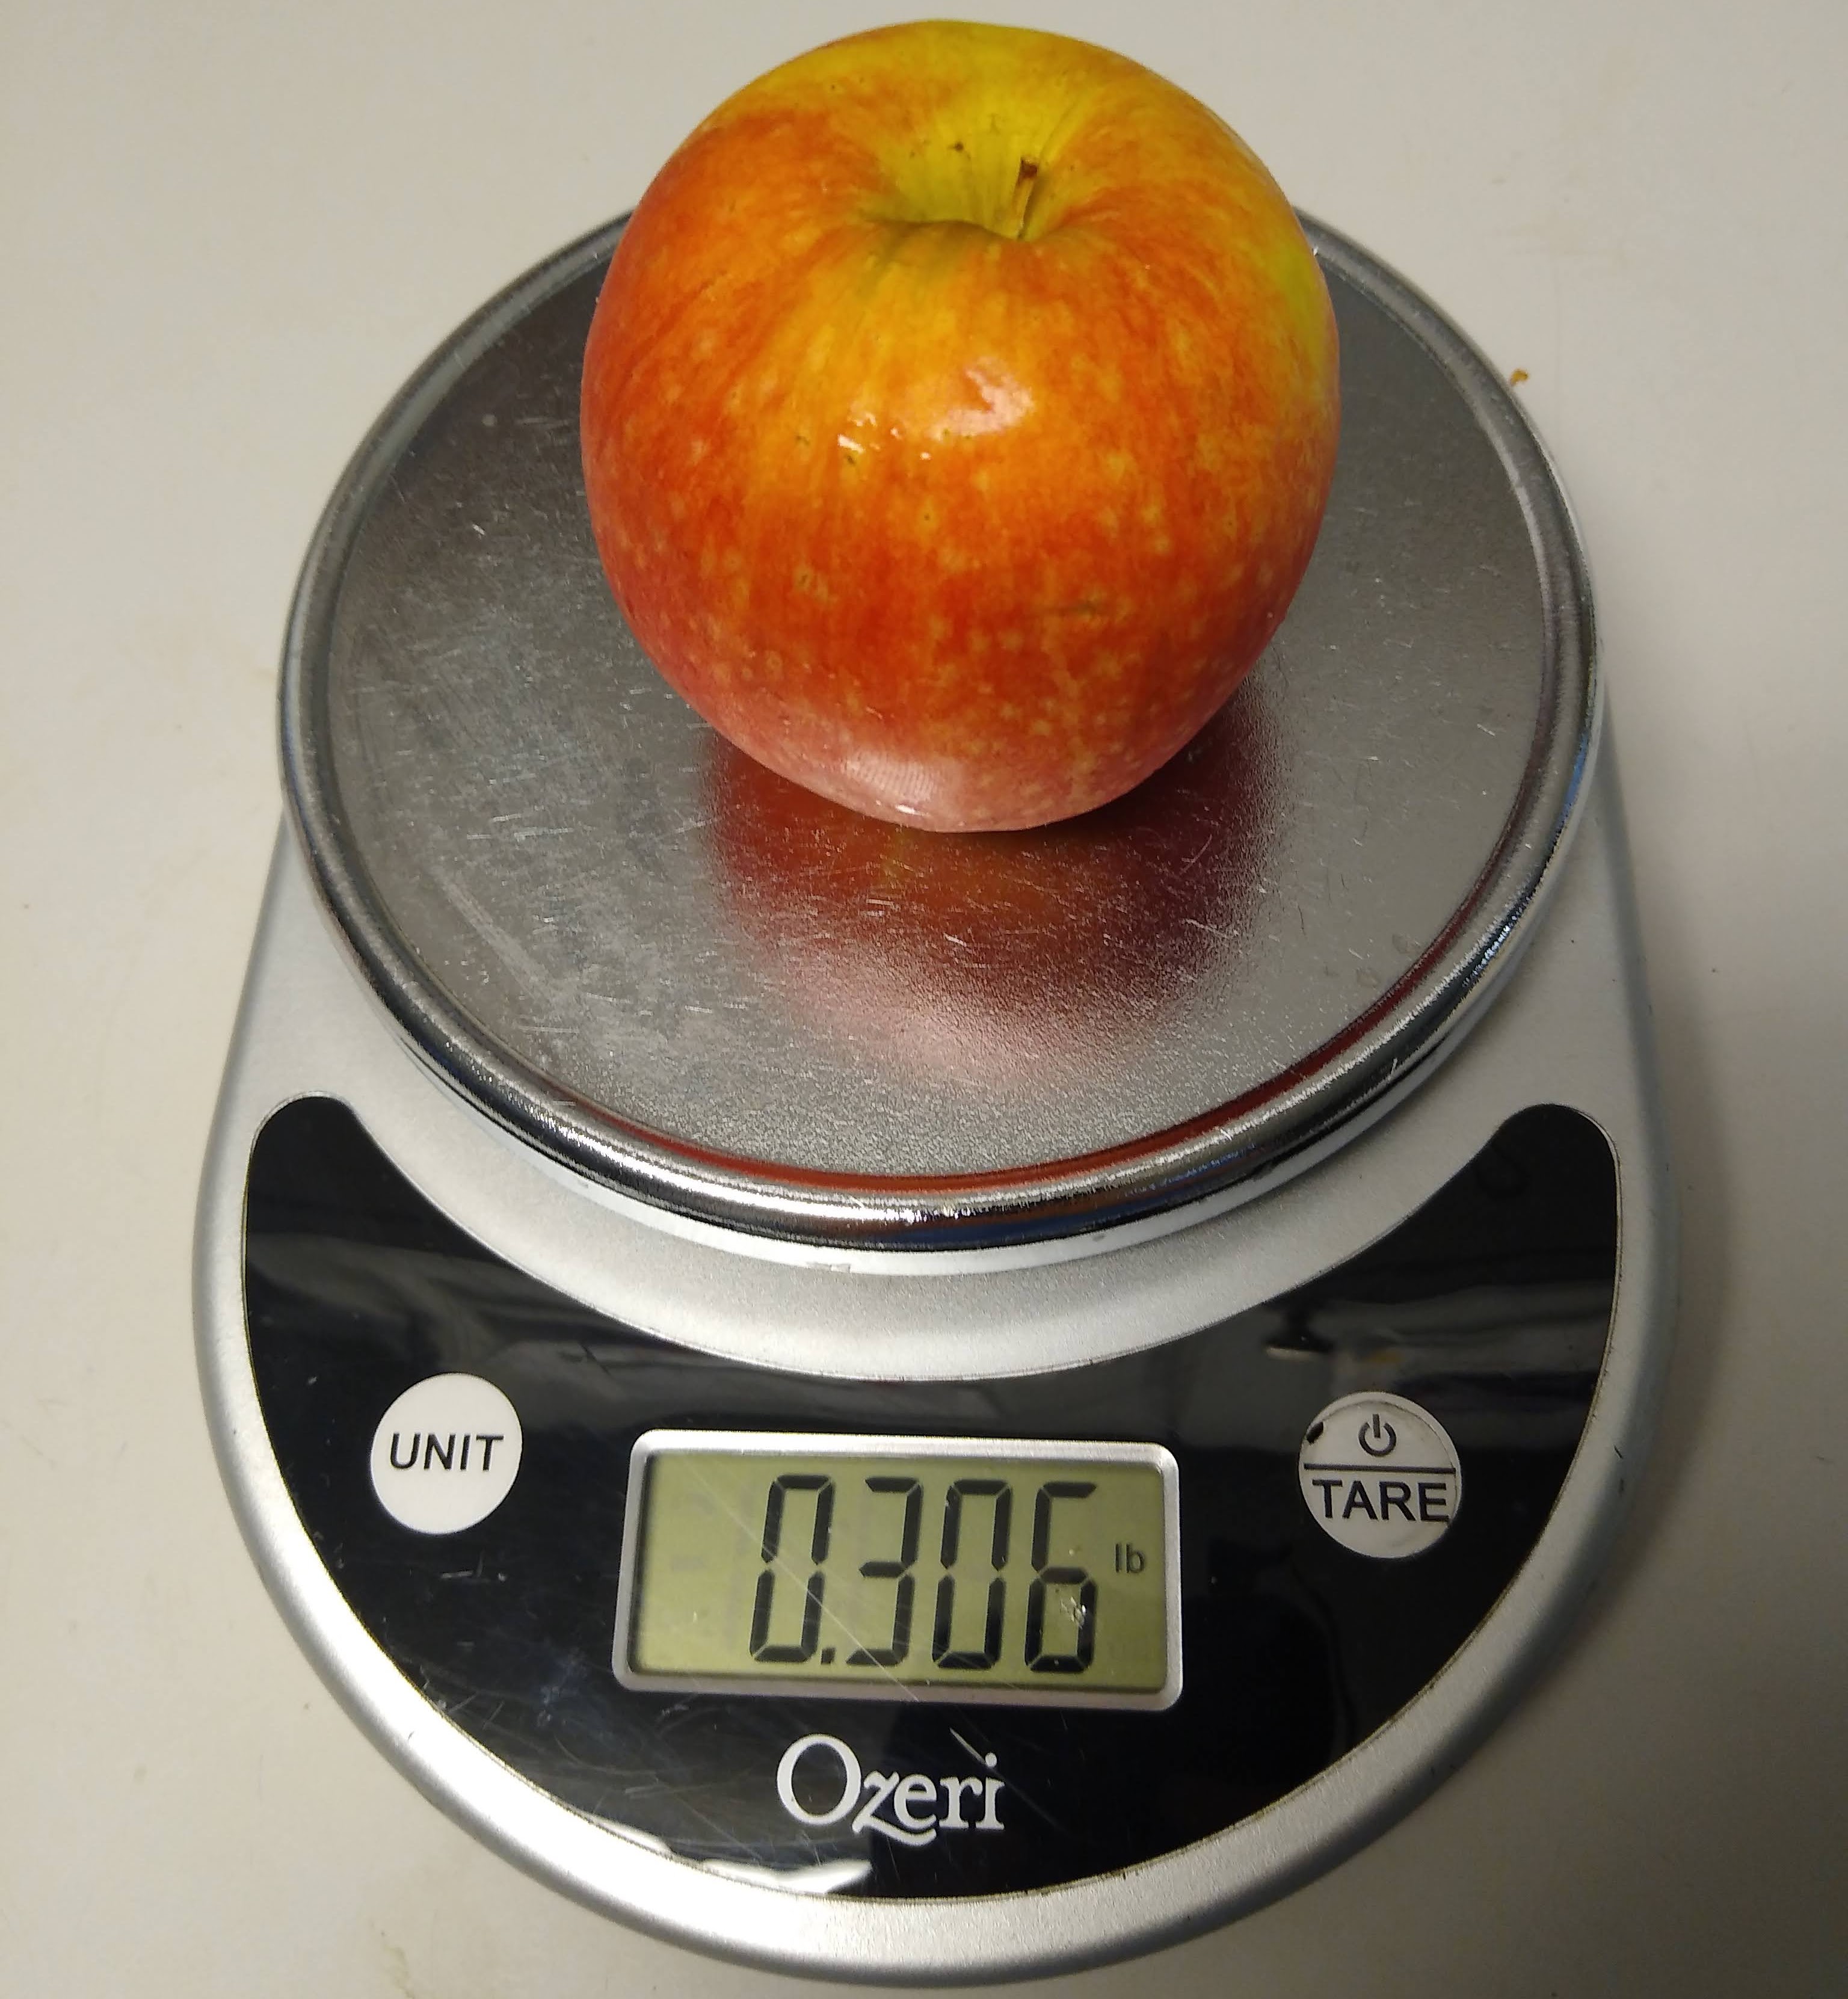 A small silver Ozeri brand scale weighing an apple for a horse. The scale is on and reads 0.306 lb.